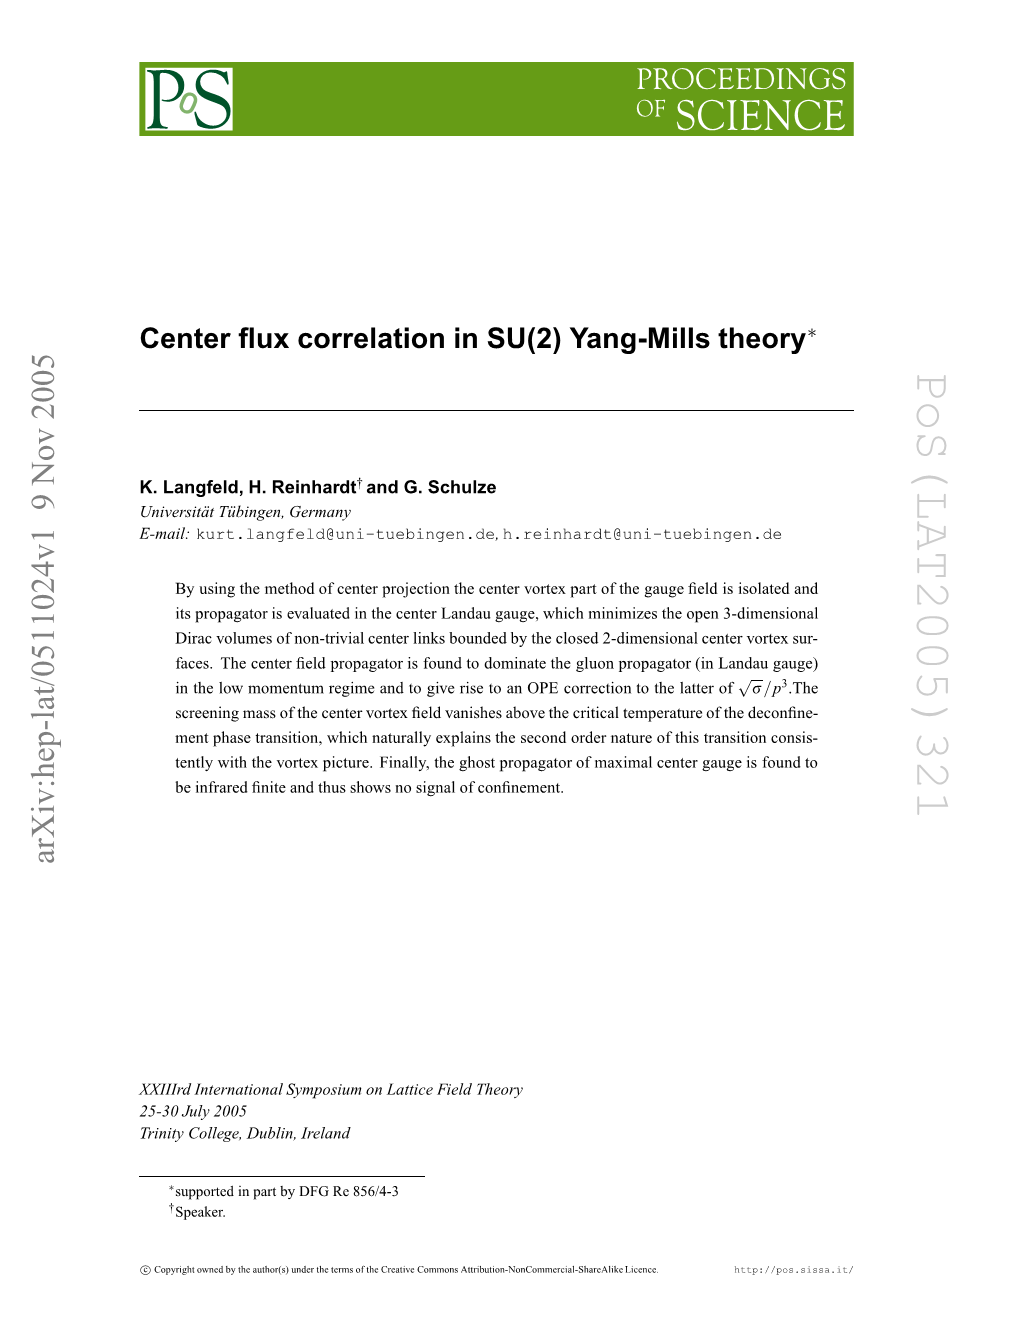 Correlations of Center Flux in SU (2) Yang-Mills Theory